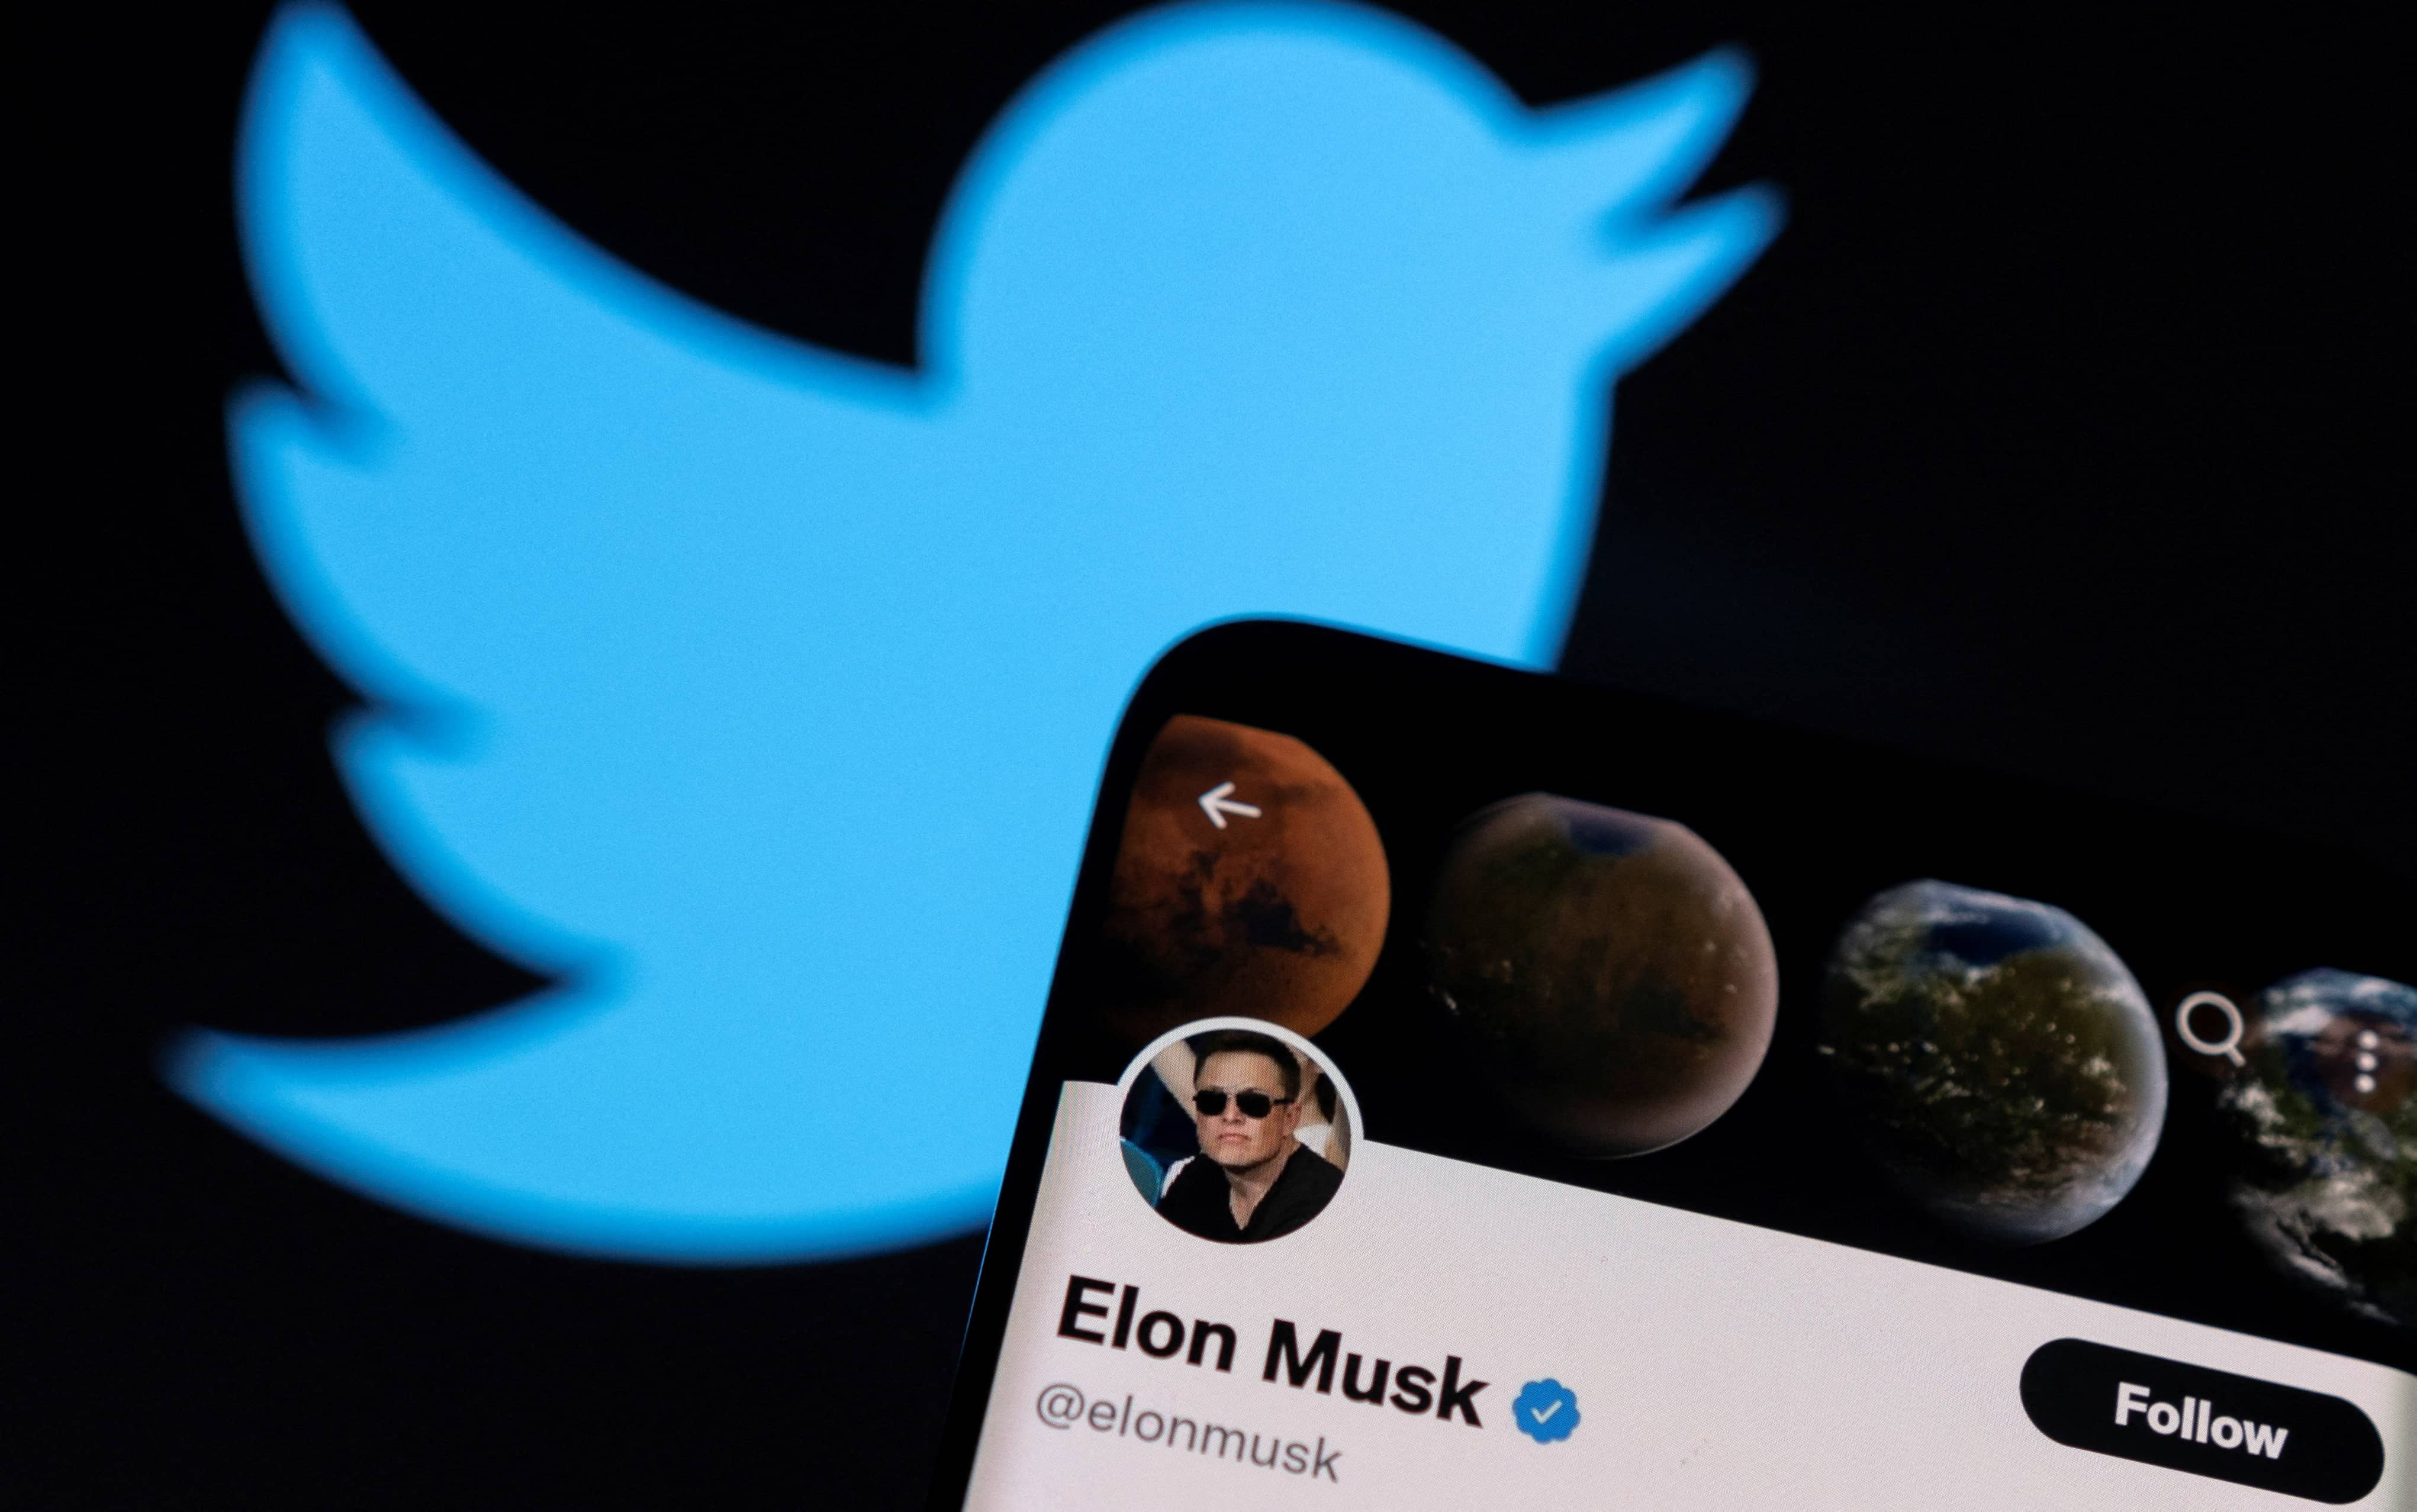 a-photo-illustration-shows-elon-musks-twitter-account-and-the-twitter-logo